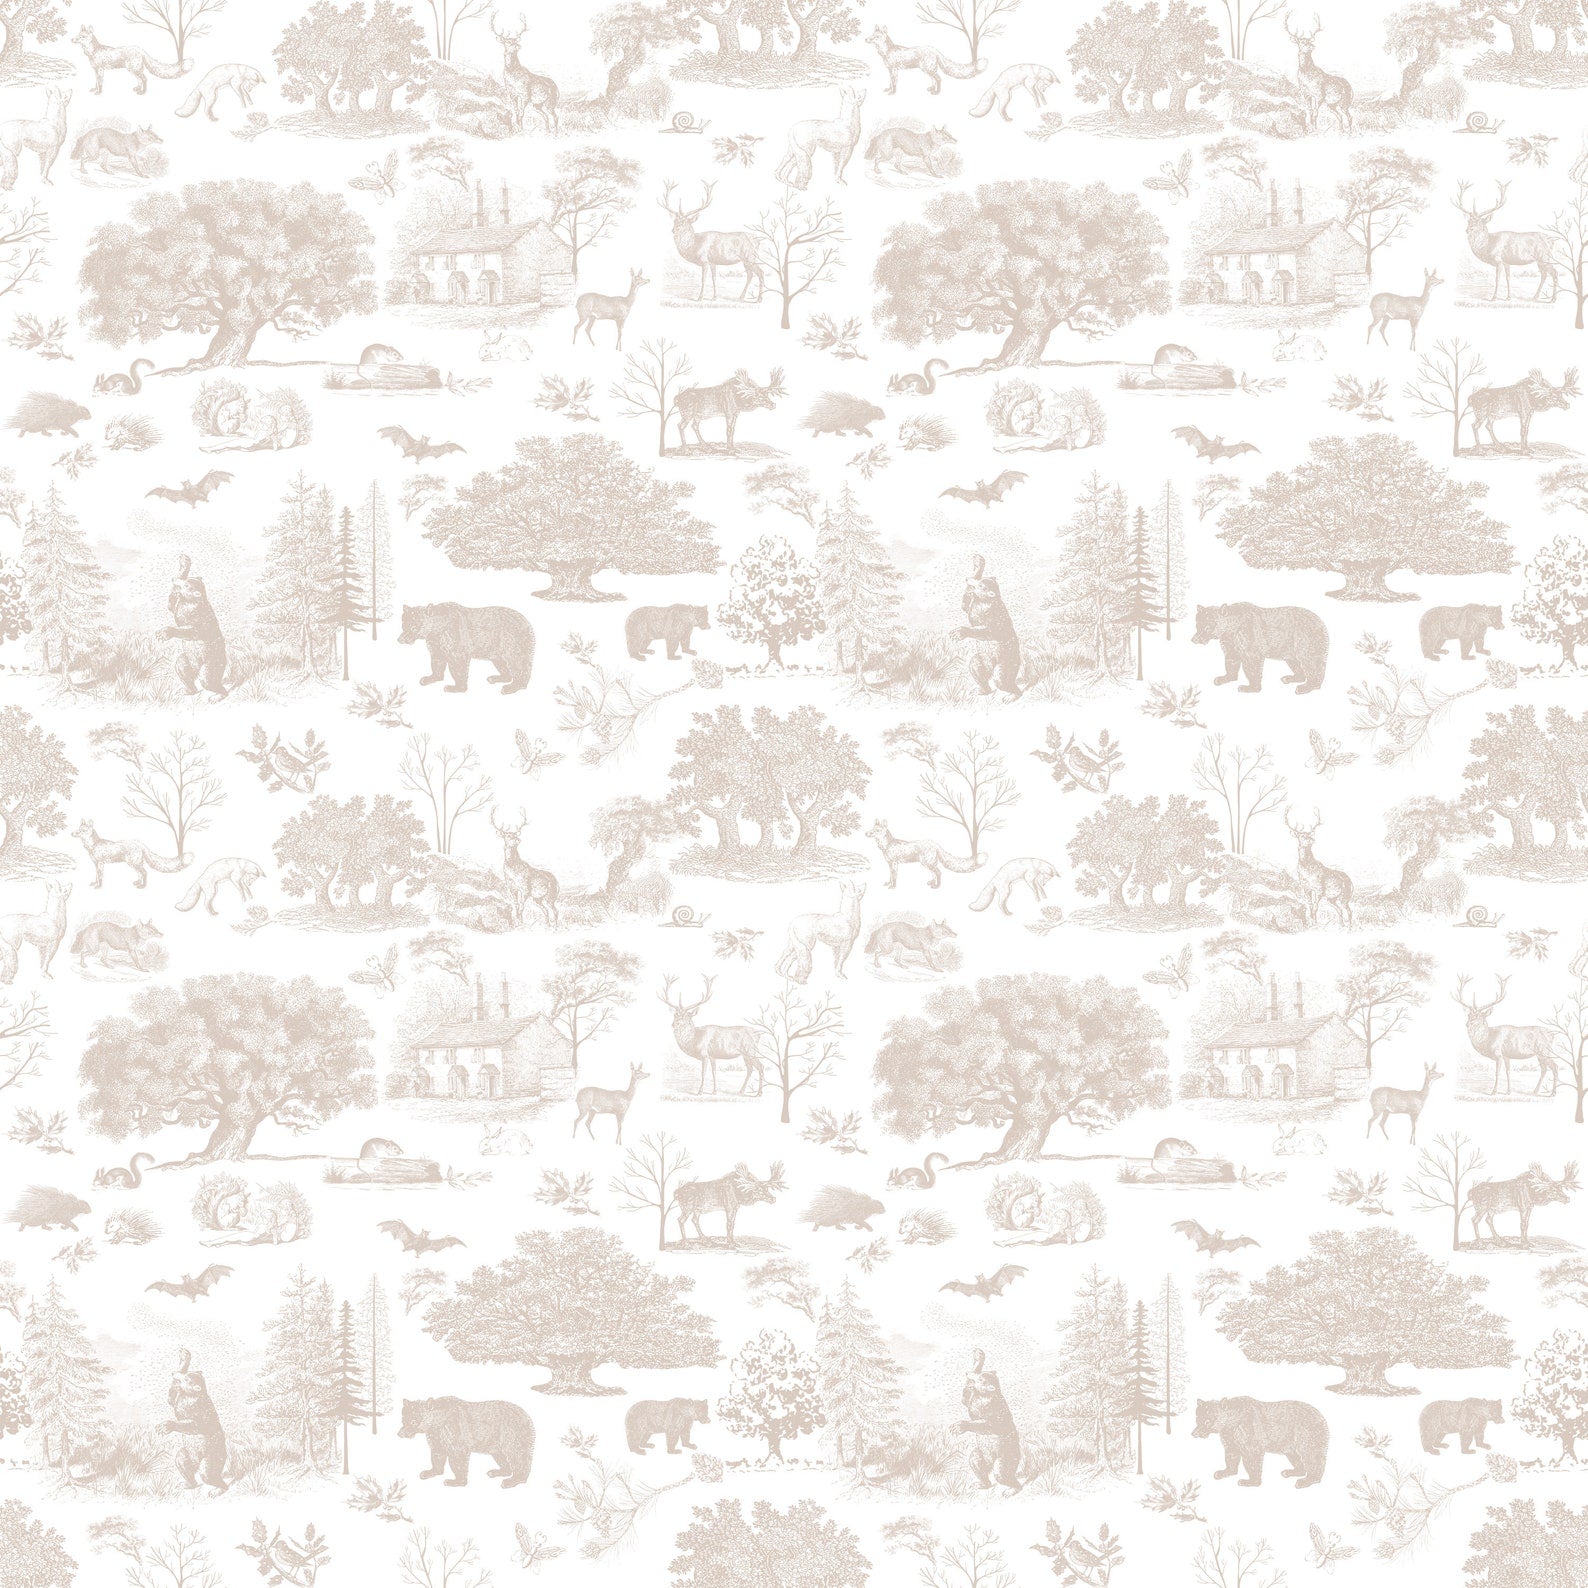 A close-up of the Vintage Neutral Toile Wildlife Wallpaper pattern, highlighting its intricate illustrations of wildlife and nature scenes in beige on a white background. The detailed design adds a touch of elegance and sophistication to any room.